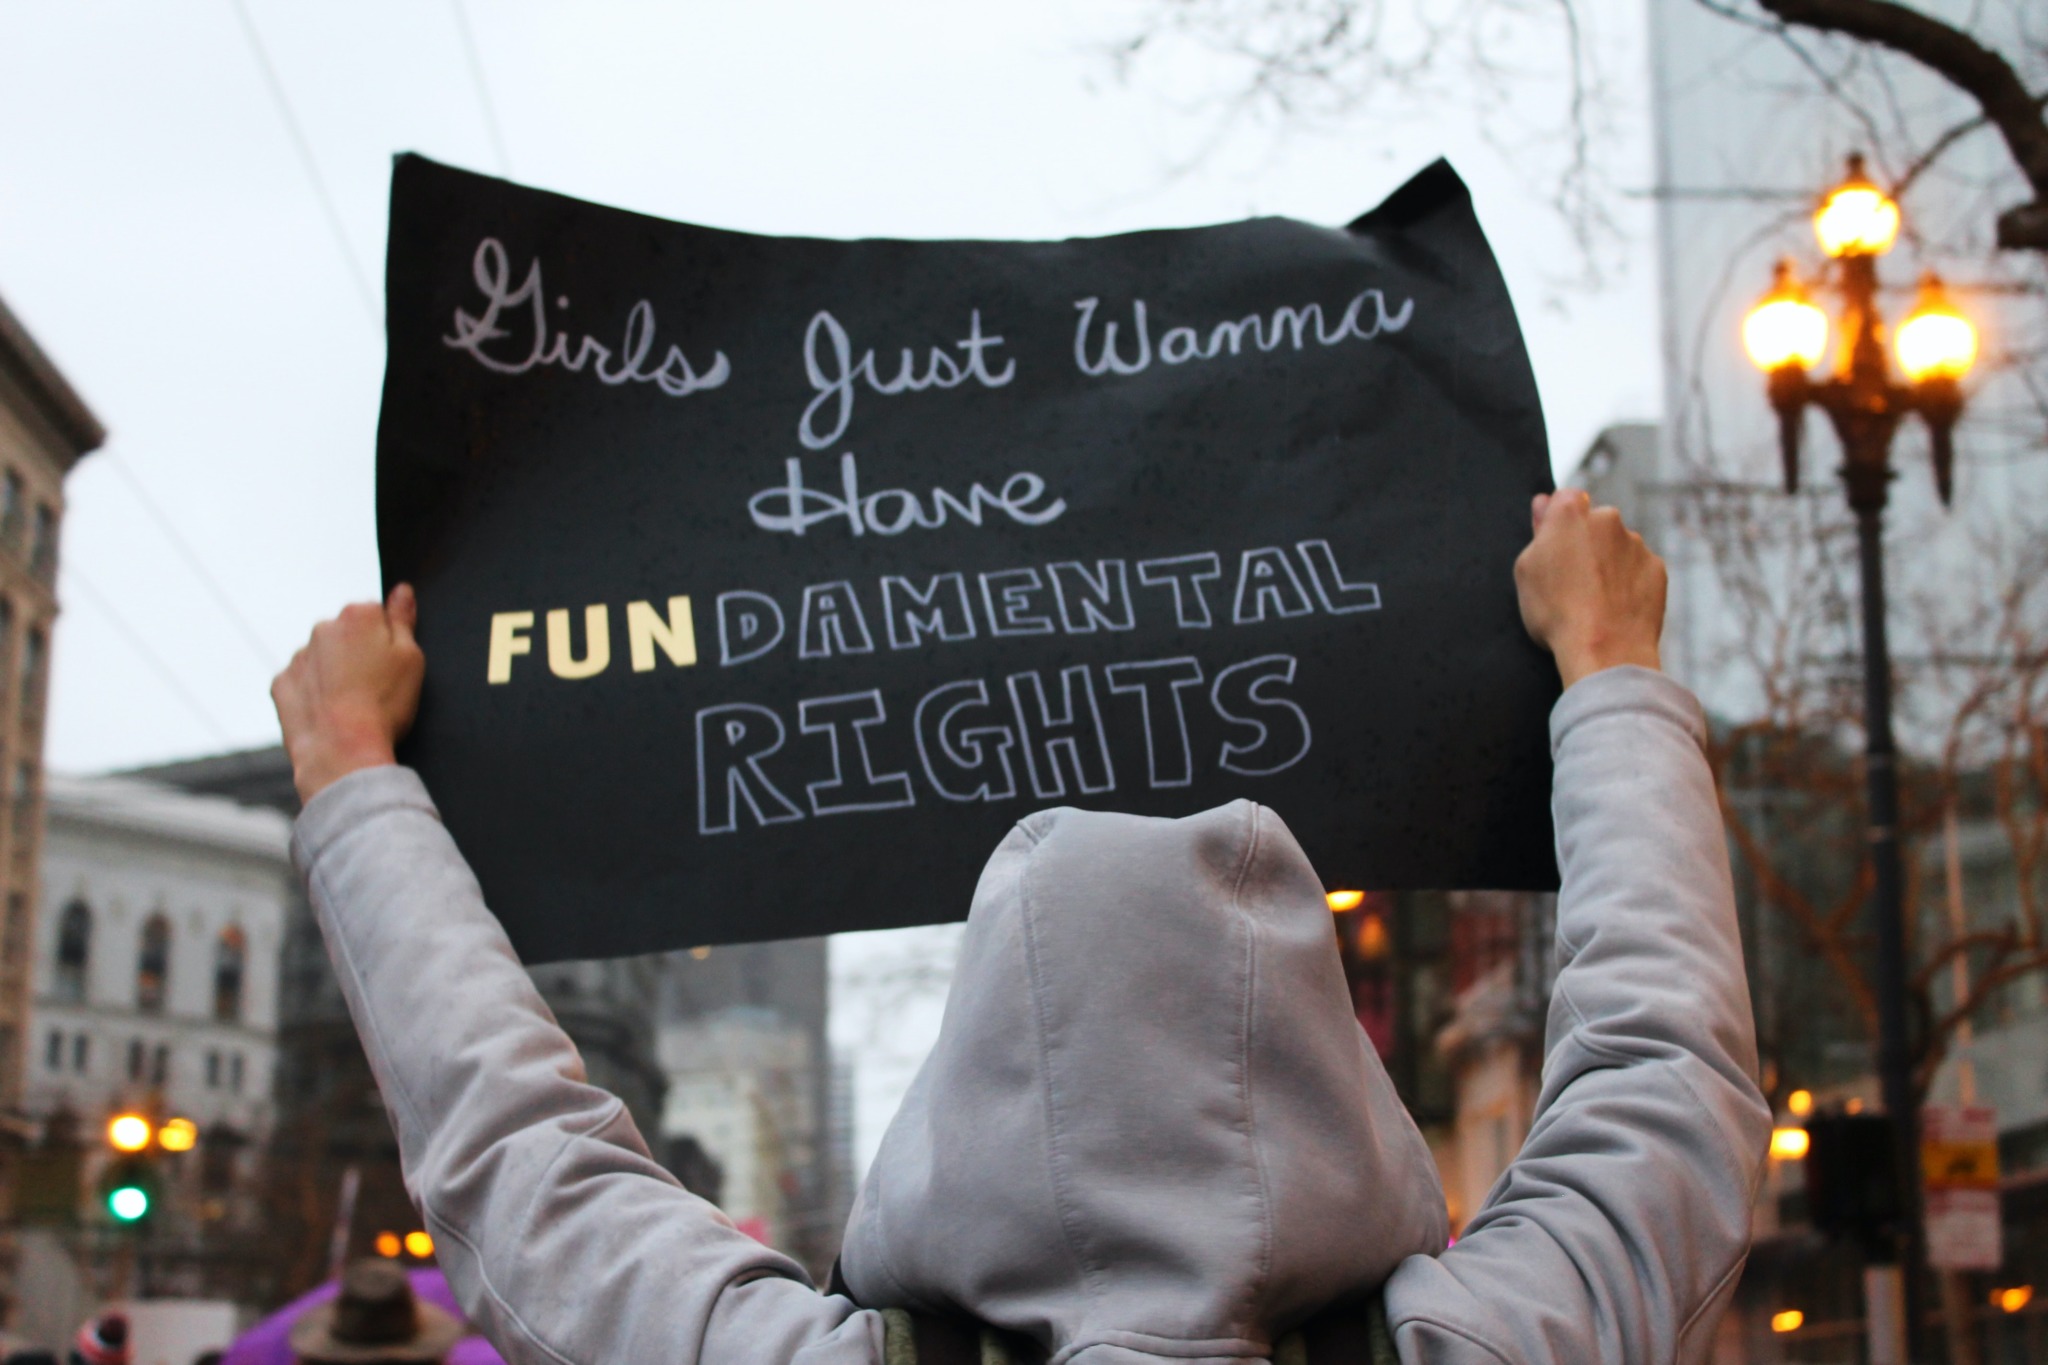  A woman in a grey hoodie holds up a sign which reads 'Girls Just Wanna Have Fundamental Rights' in front of a blurred background of a city street with cars and buildings.